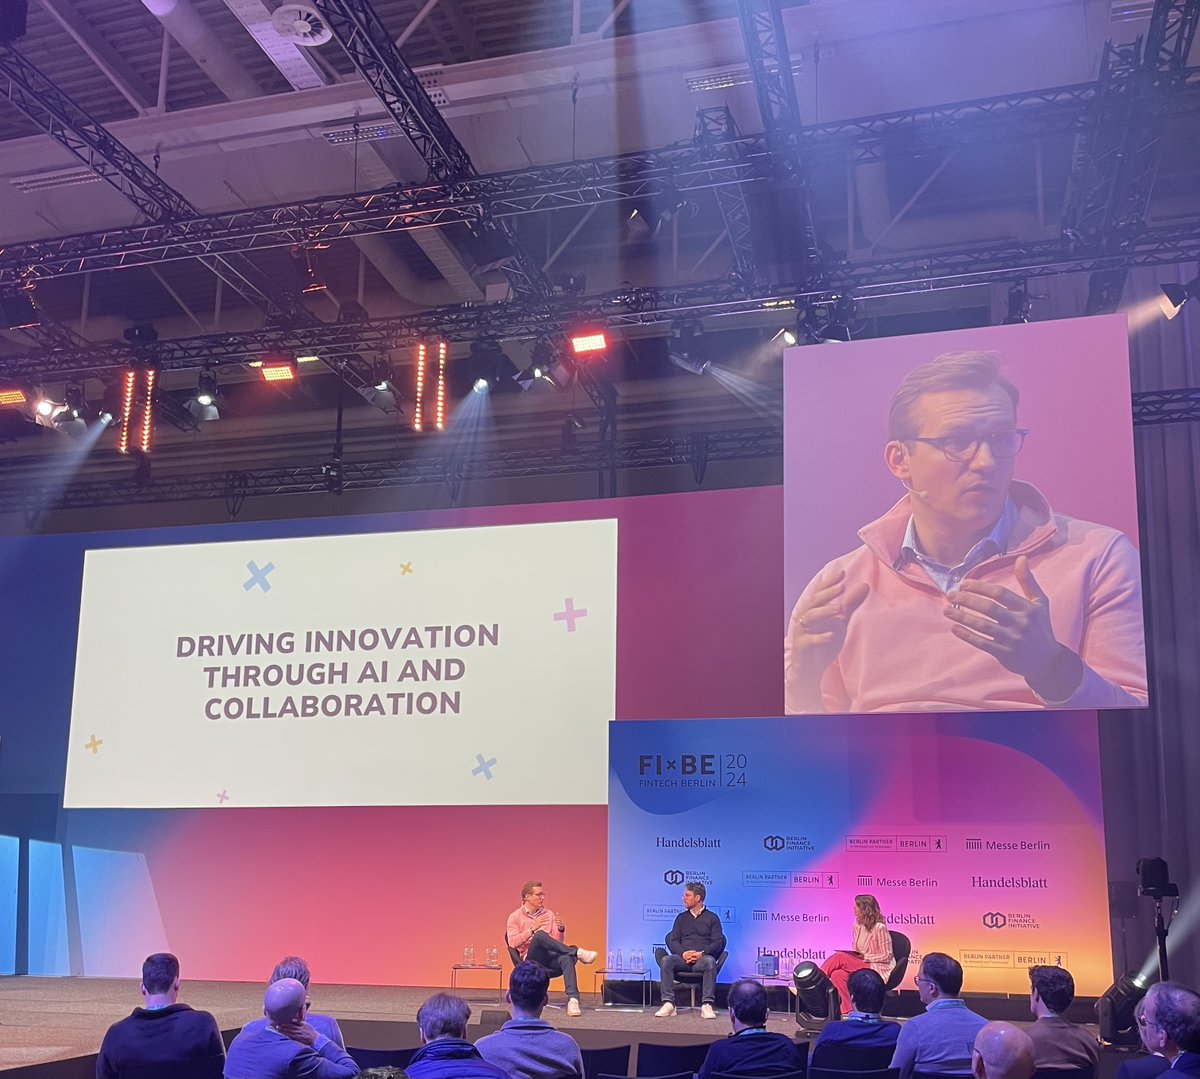 'Half of our workforce has an engineering background, demonstrating the strong powerhouse we are building internally at Klarna” - our very own Dominic Hoffmann on driving innovation through AI and collaboration @FIBE_Berlin.